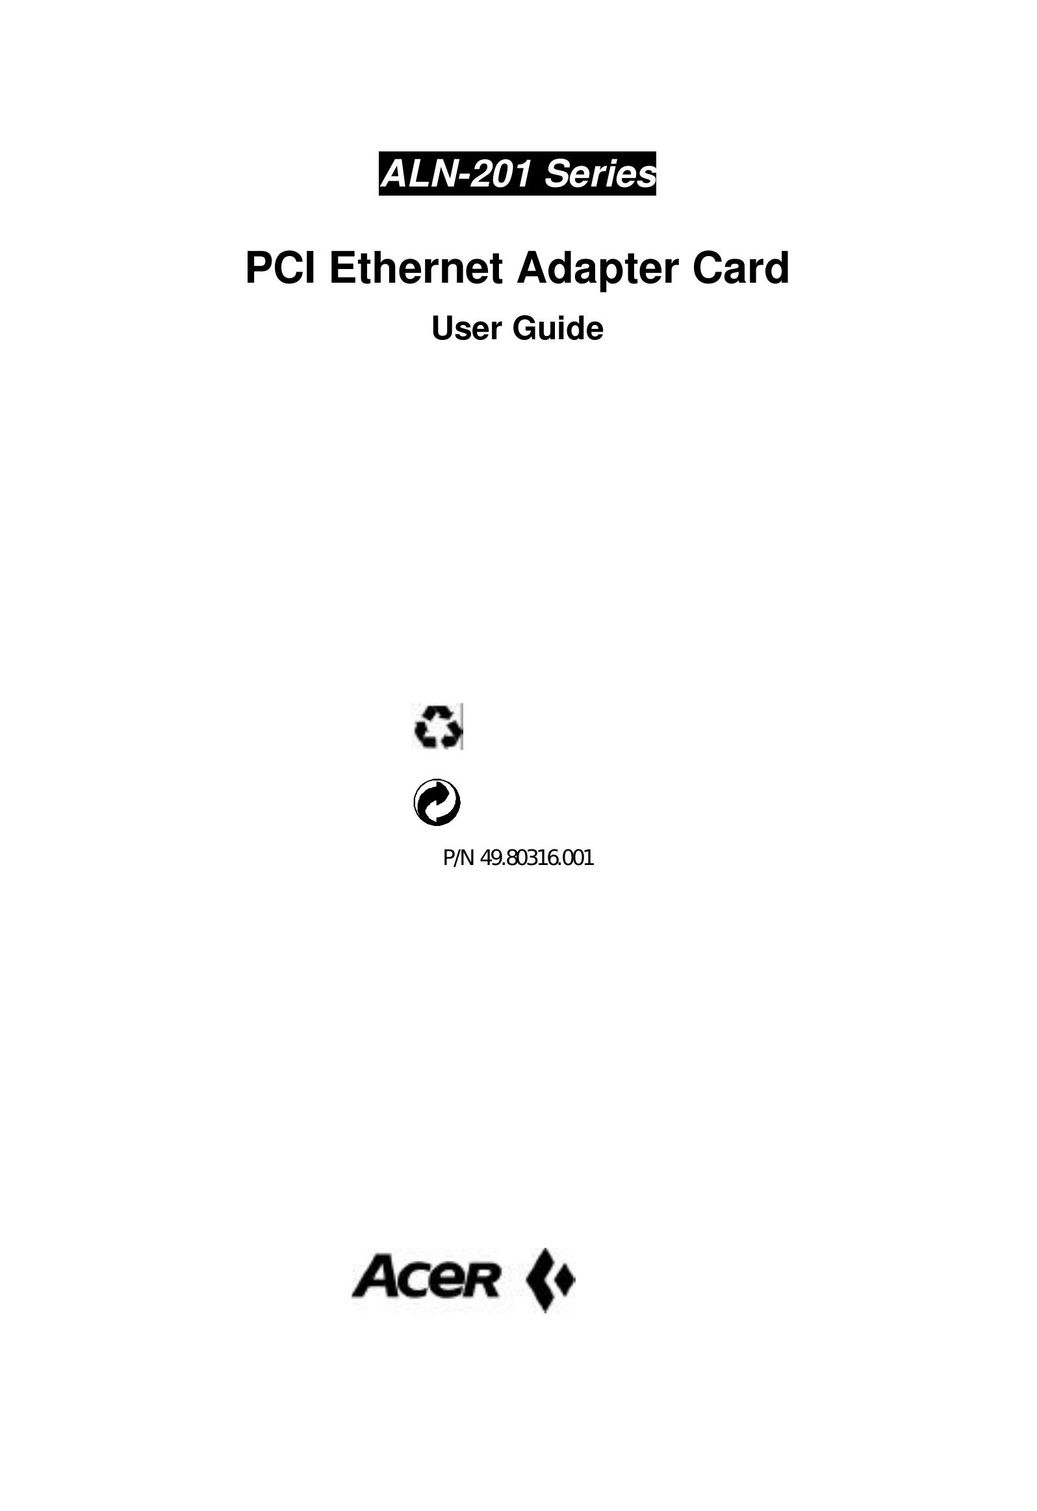 Acer ALN-201 Network Card User Manual